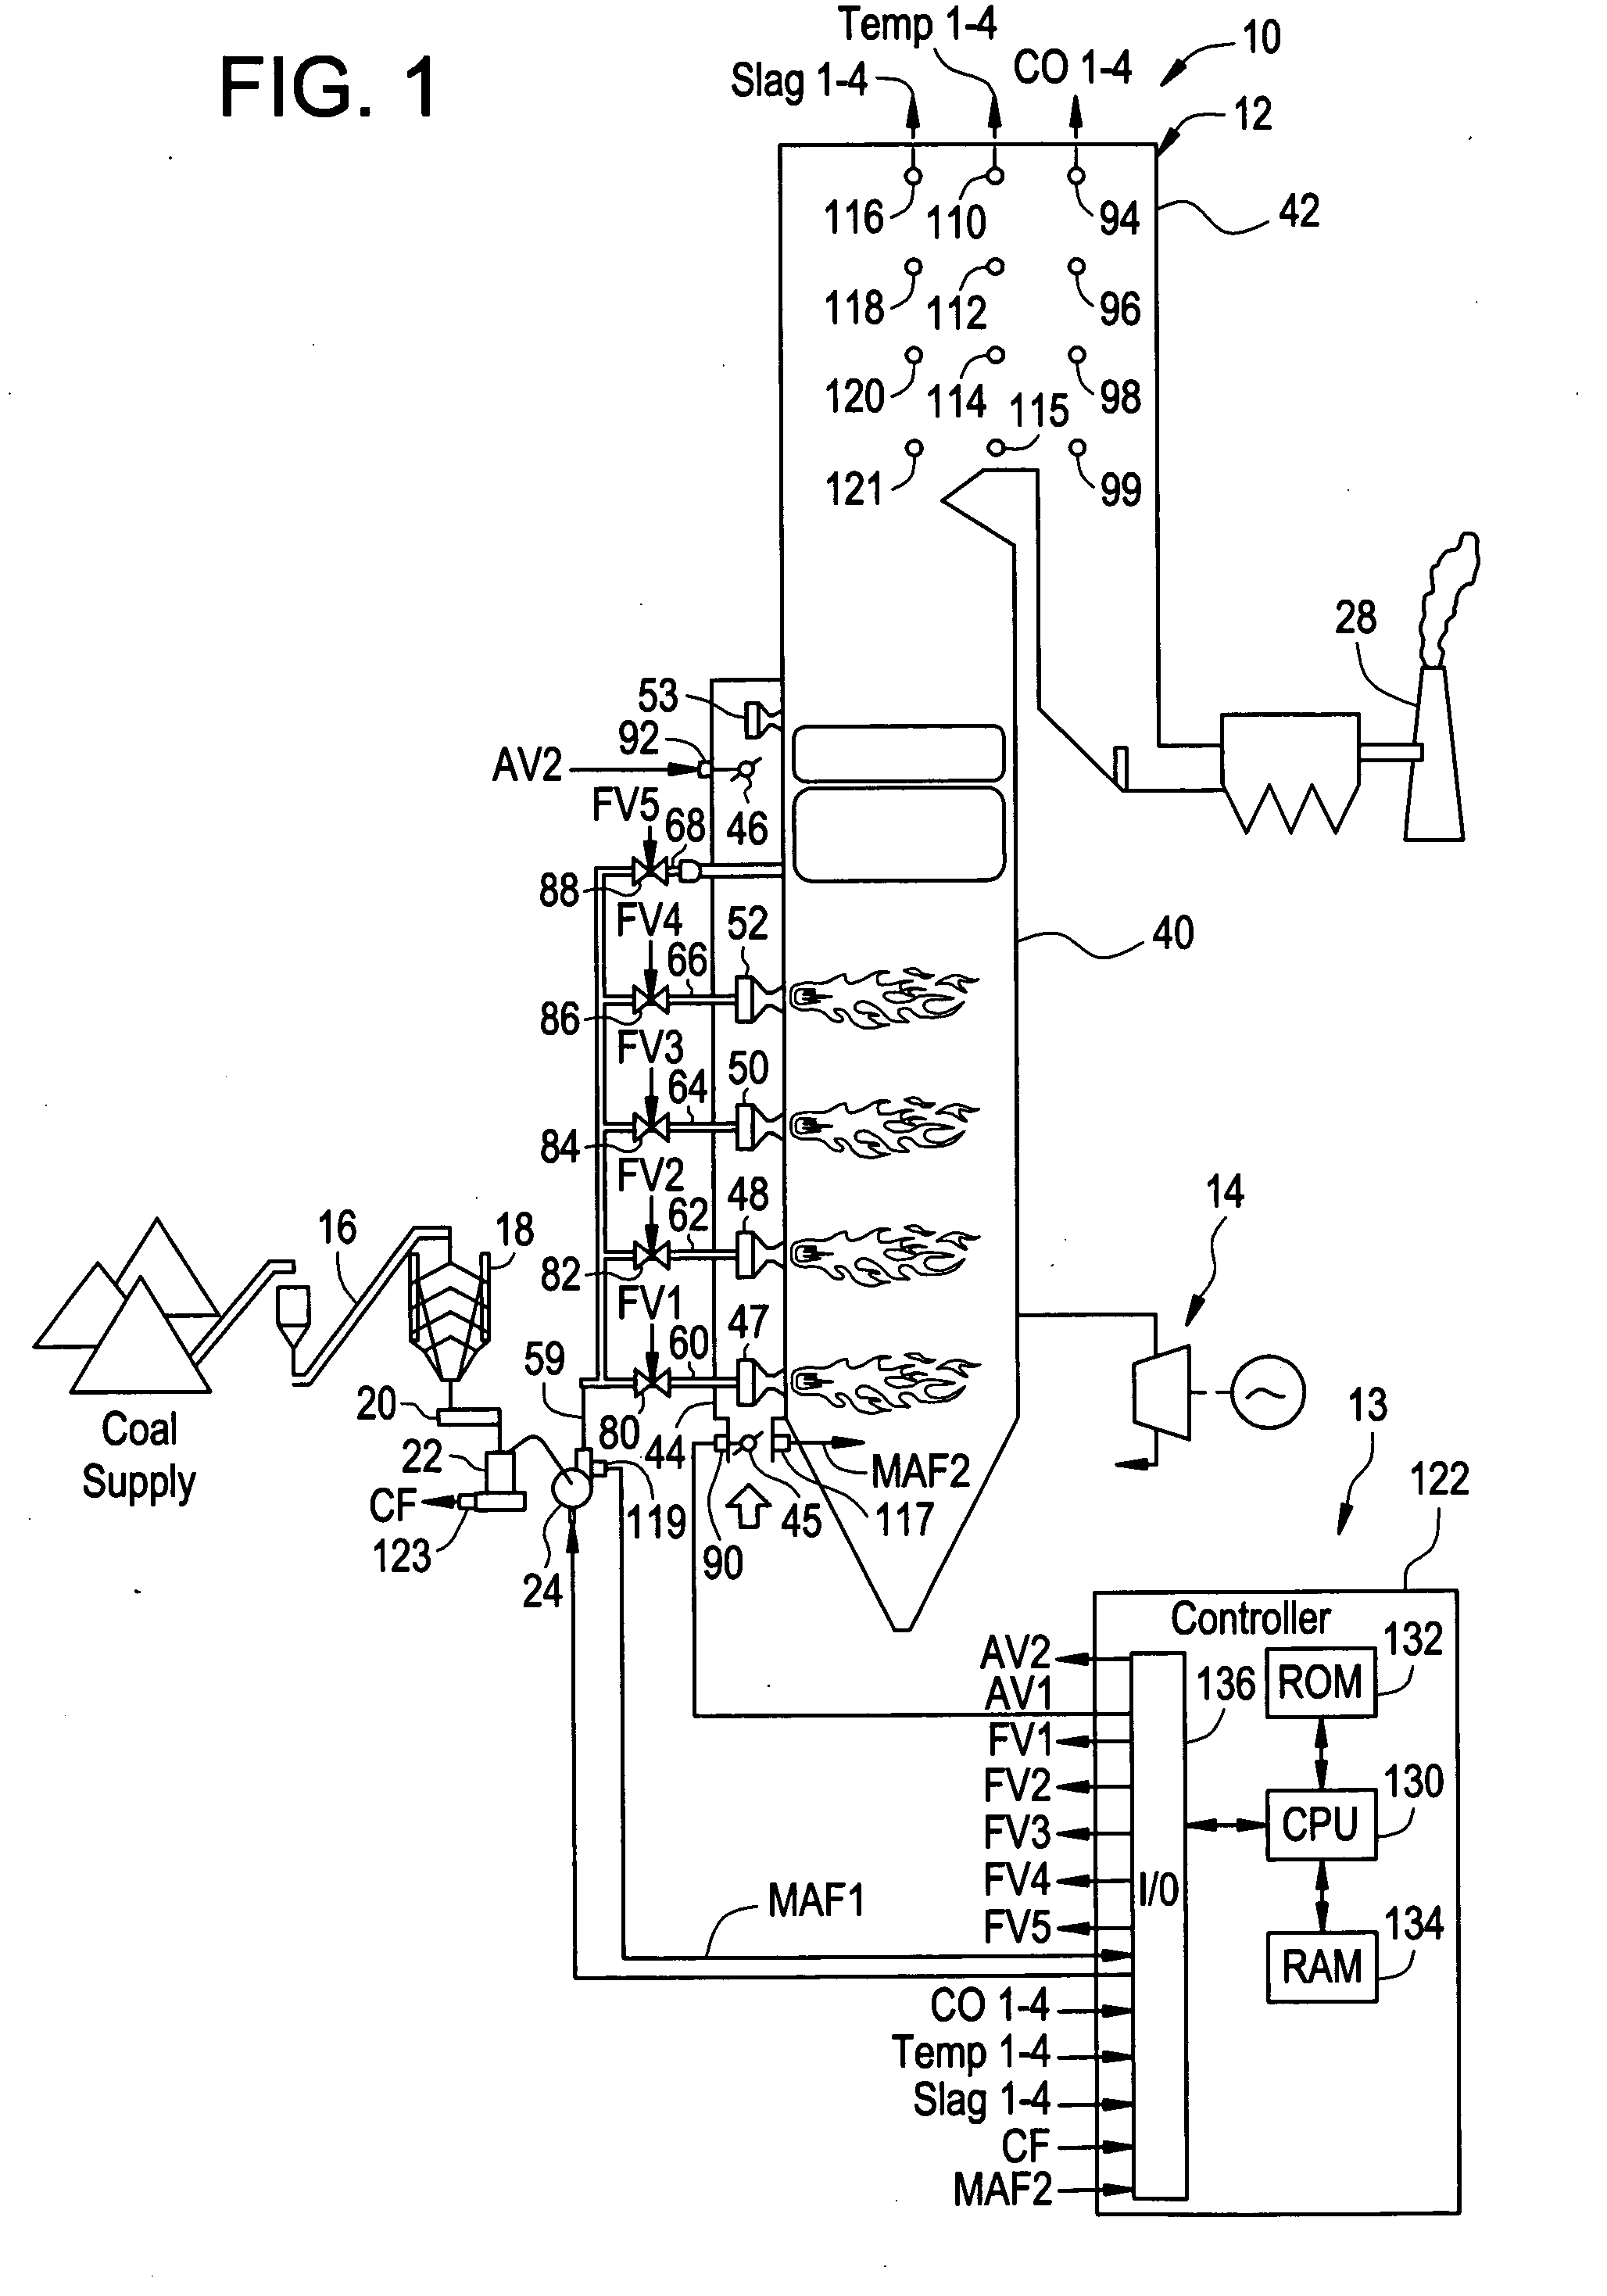 System, method, and article of manufacture for adjusting CO emission levels at predetermined locations in a boiler system